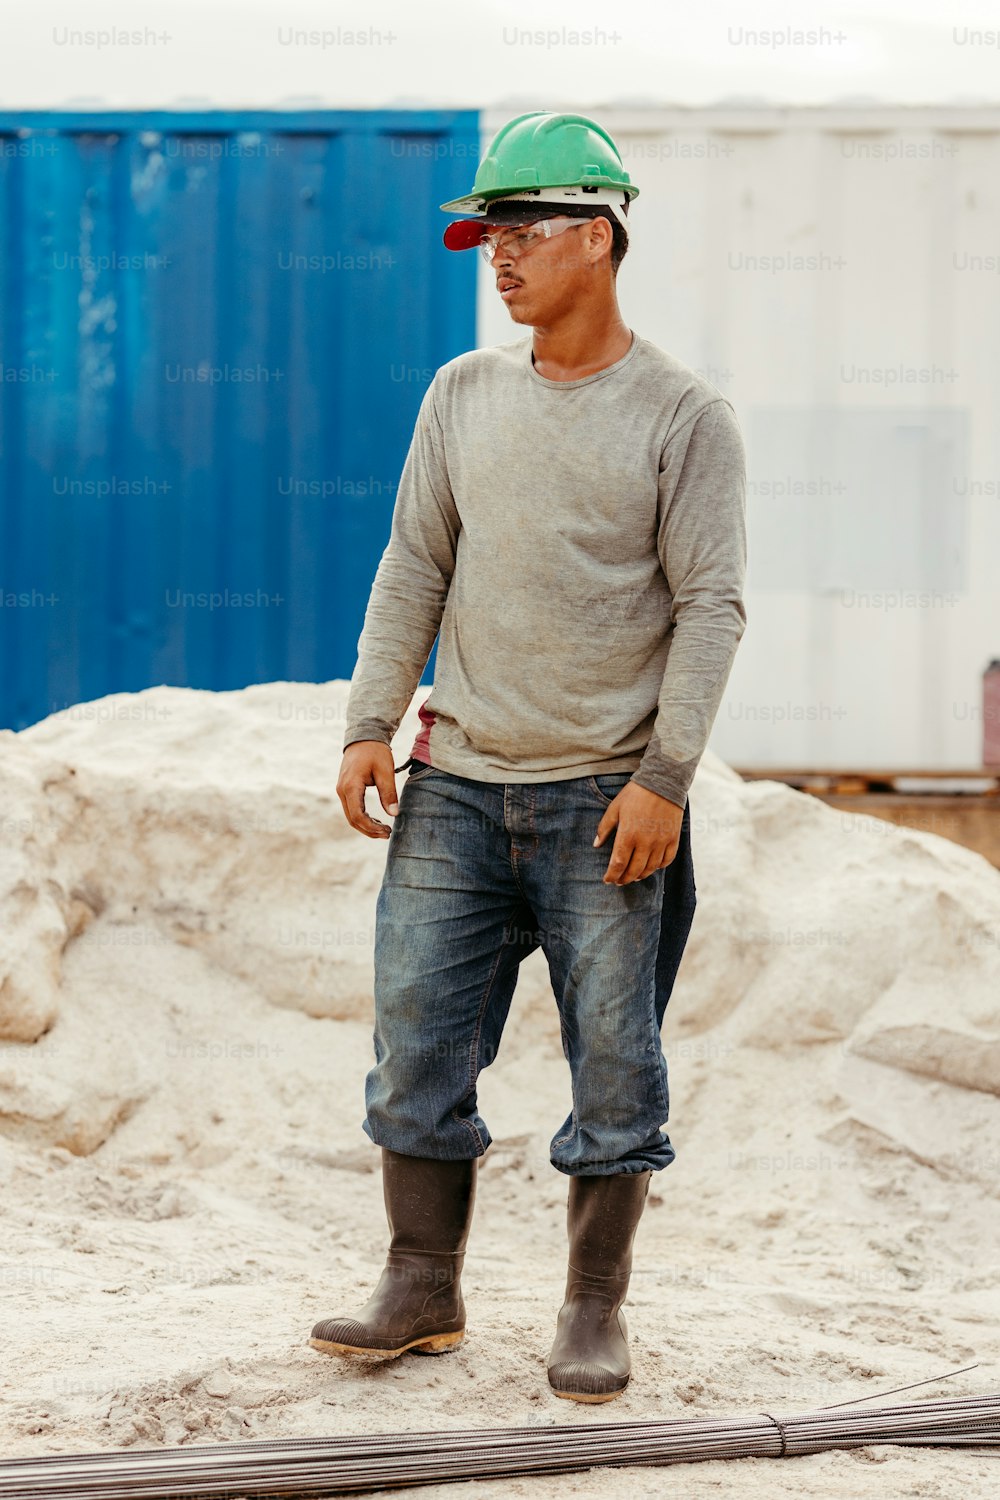 a man wearing a hard hat and jeans